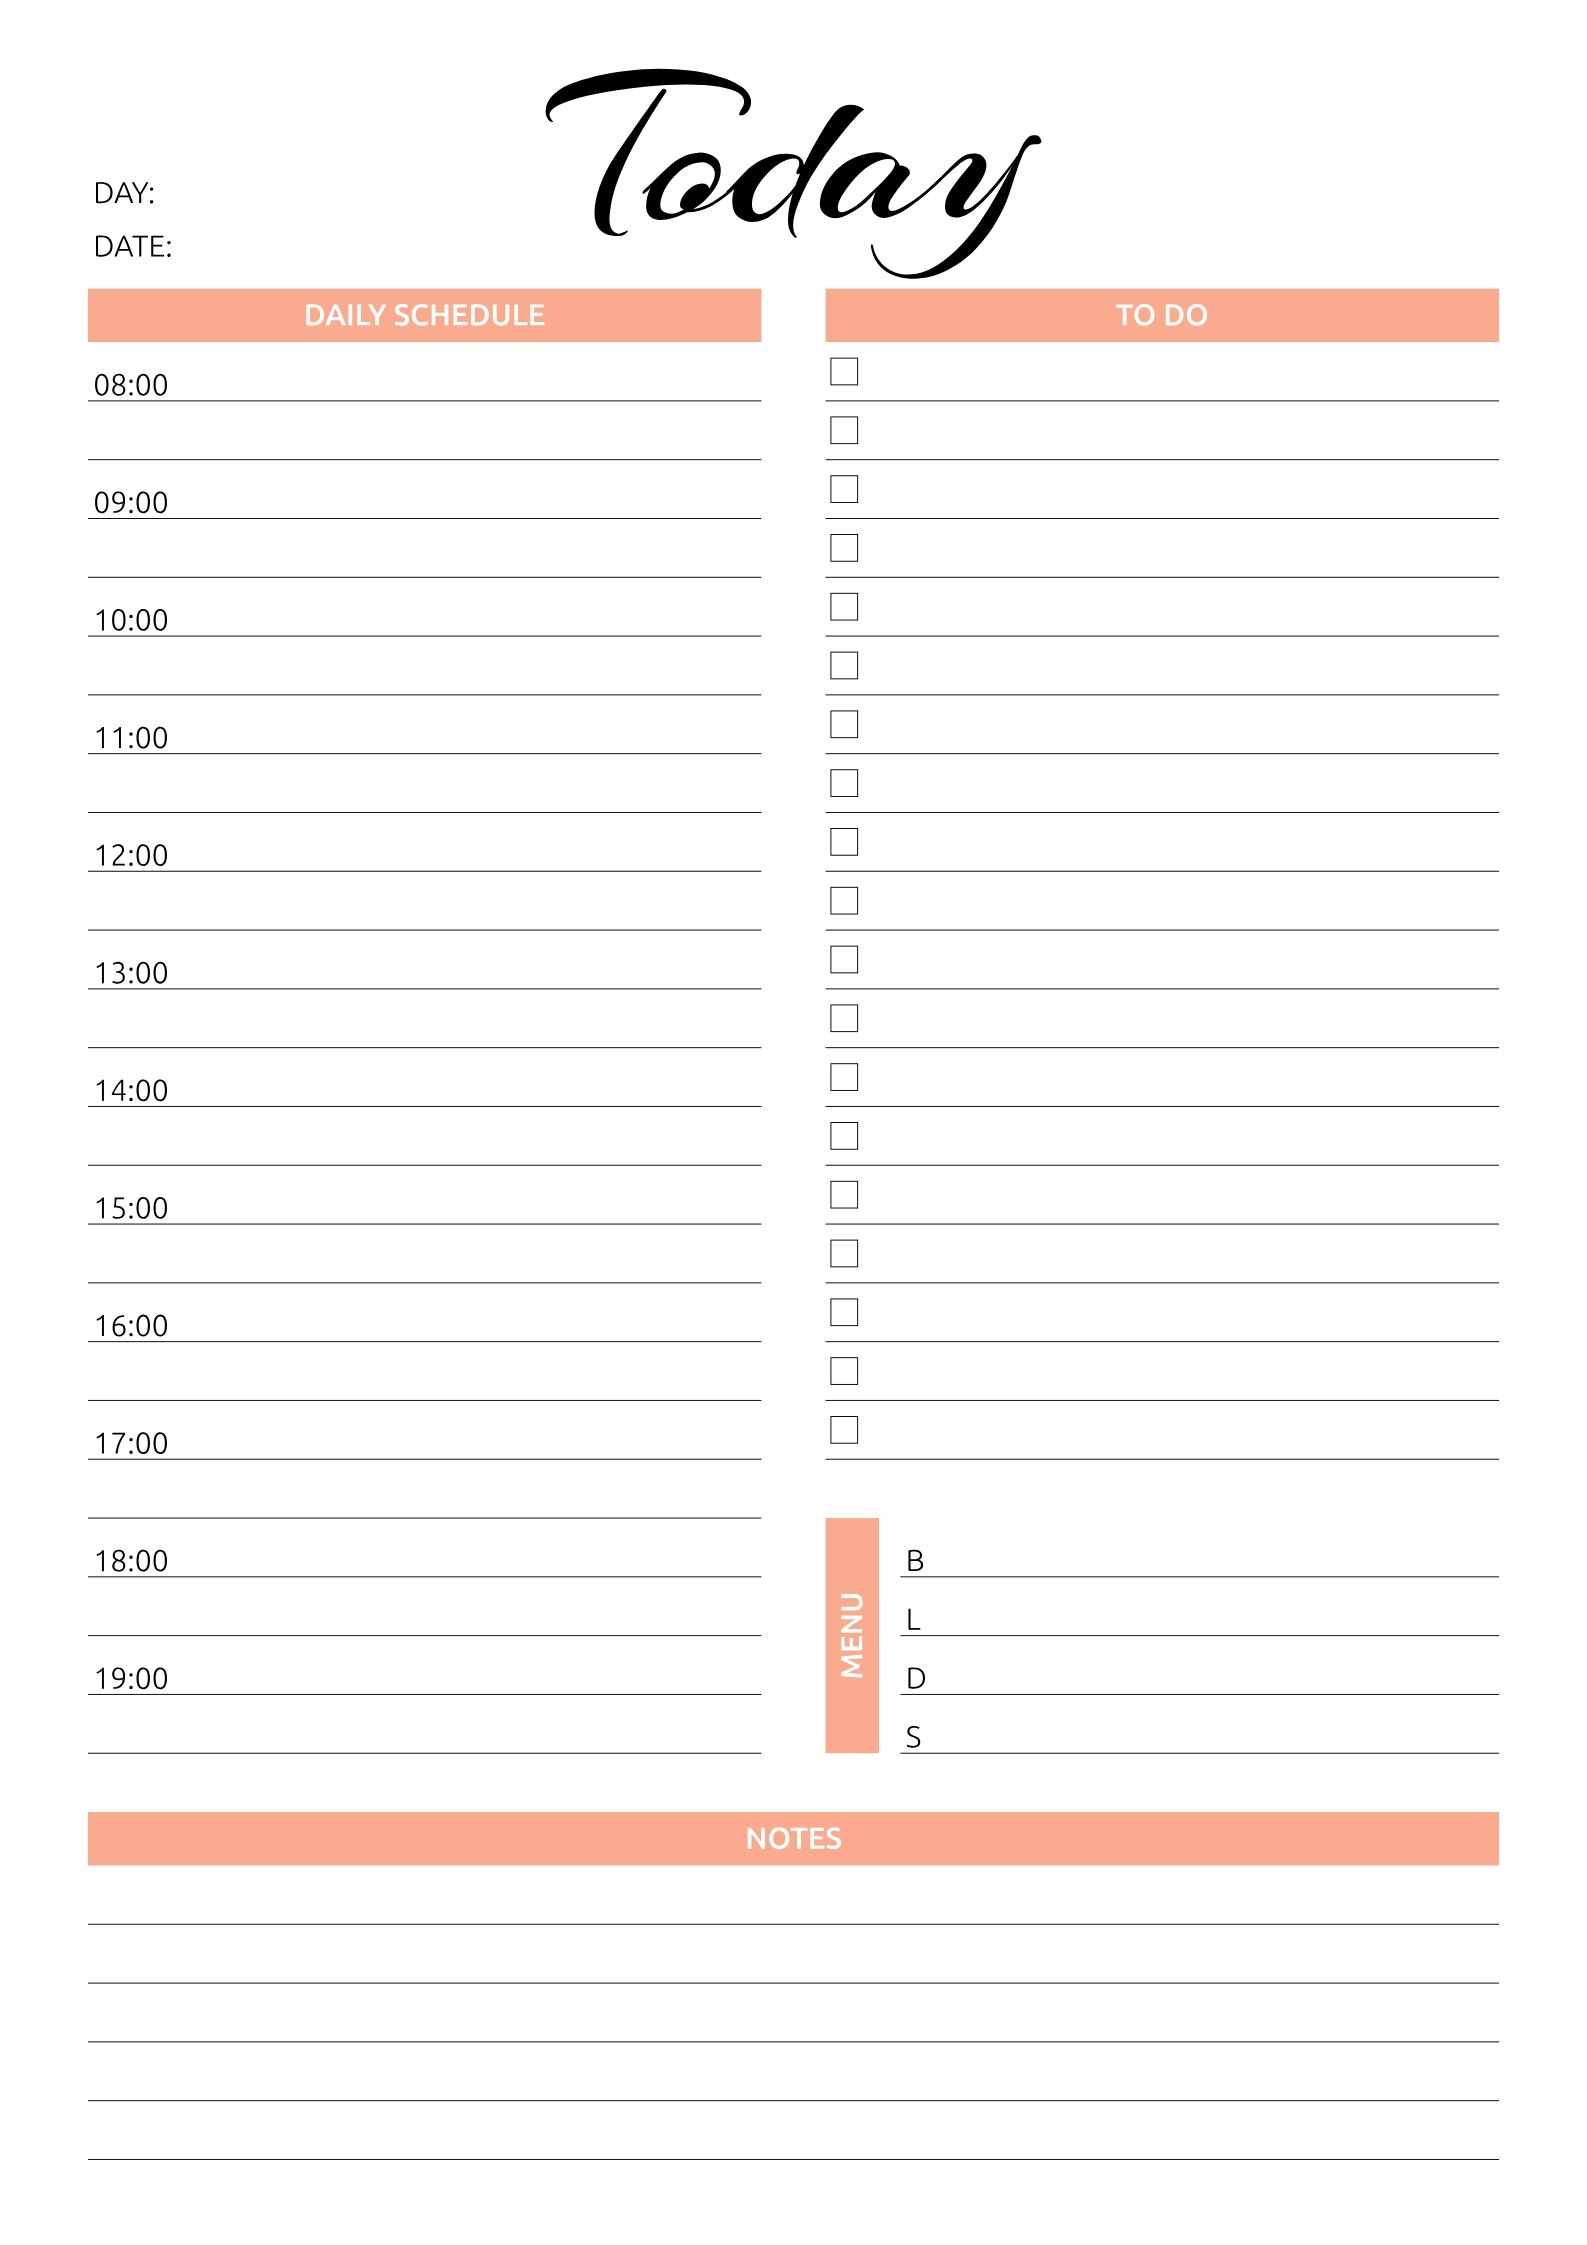 The Printable Daily Hourly Schedule In 2020 | Daily pertaining to Blank Schedule With Hourly Counter